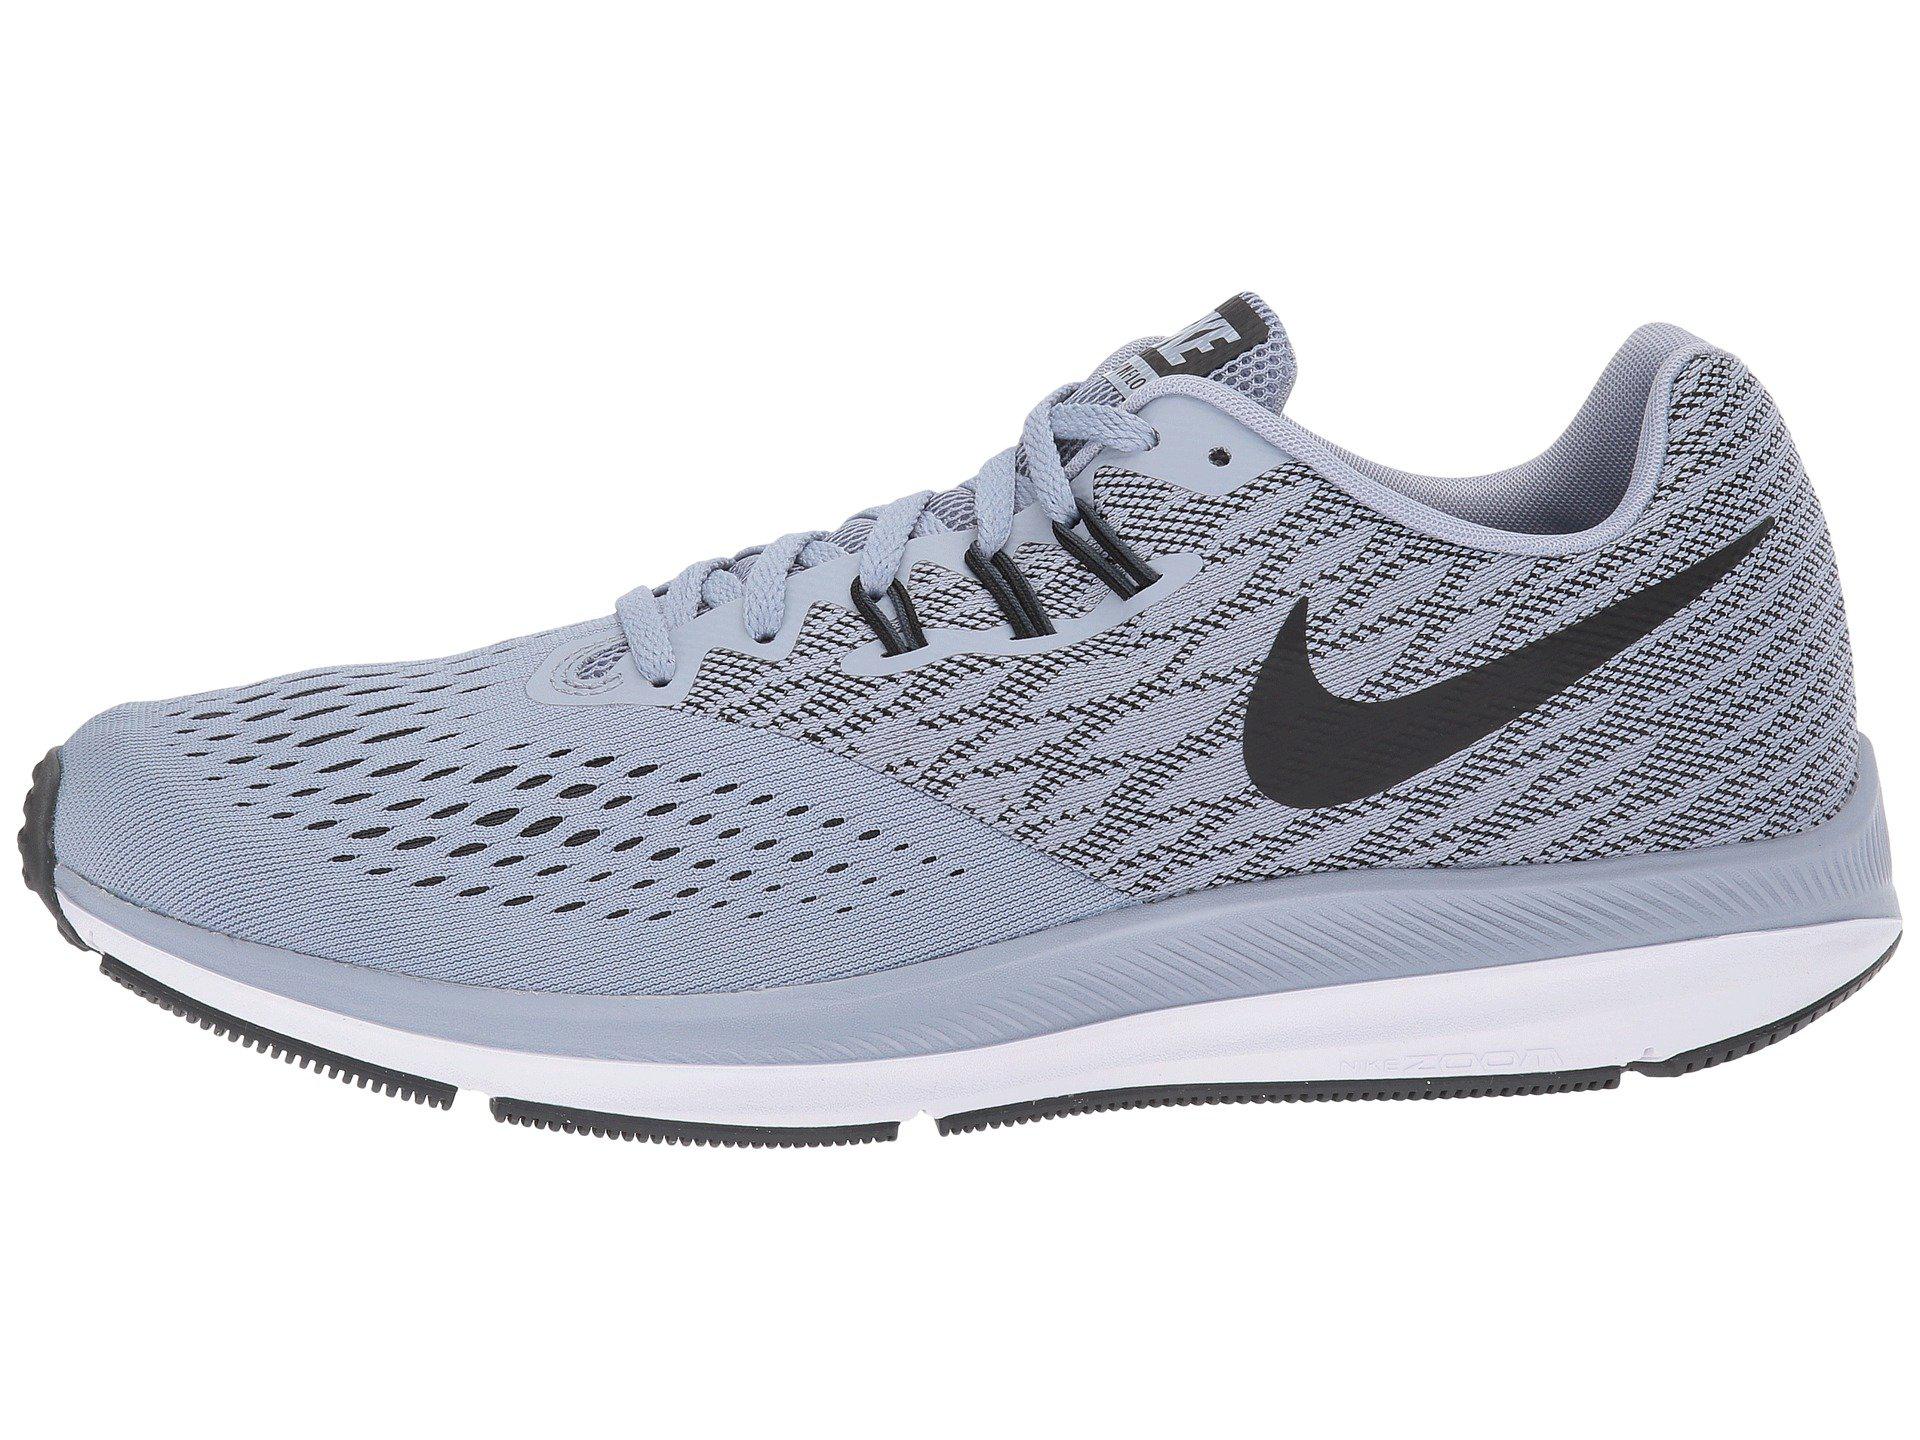 Nike Rubber Zoom Winflo 4 (glacier Grey/black/anthracite/white) Running  Shoes in Gray for Men - Lyst